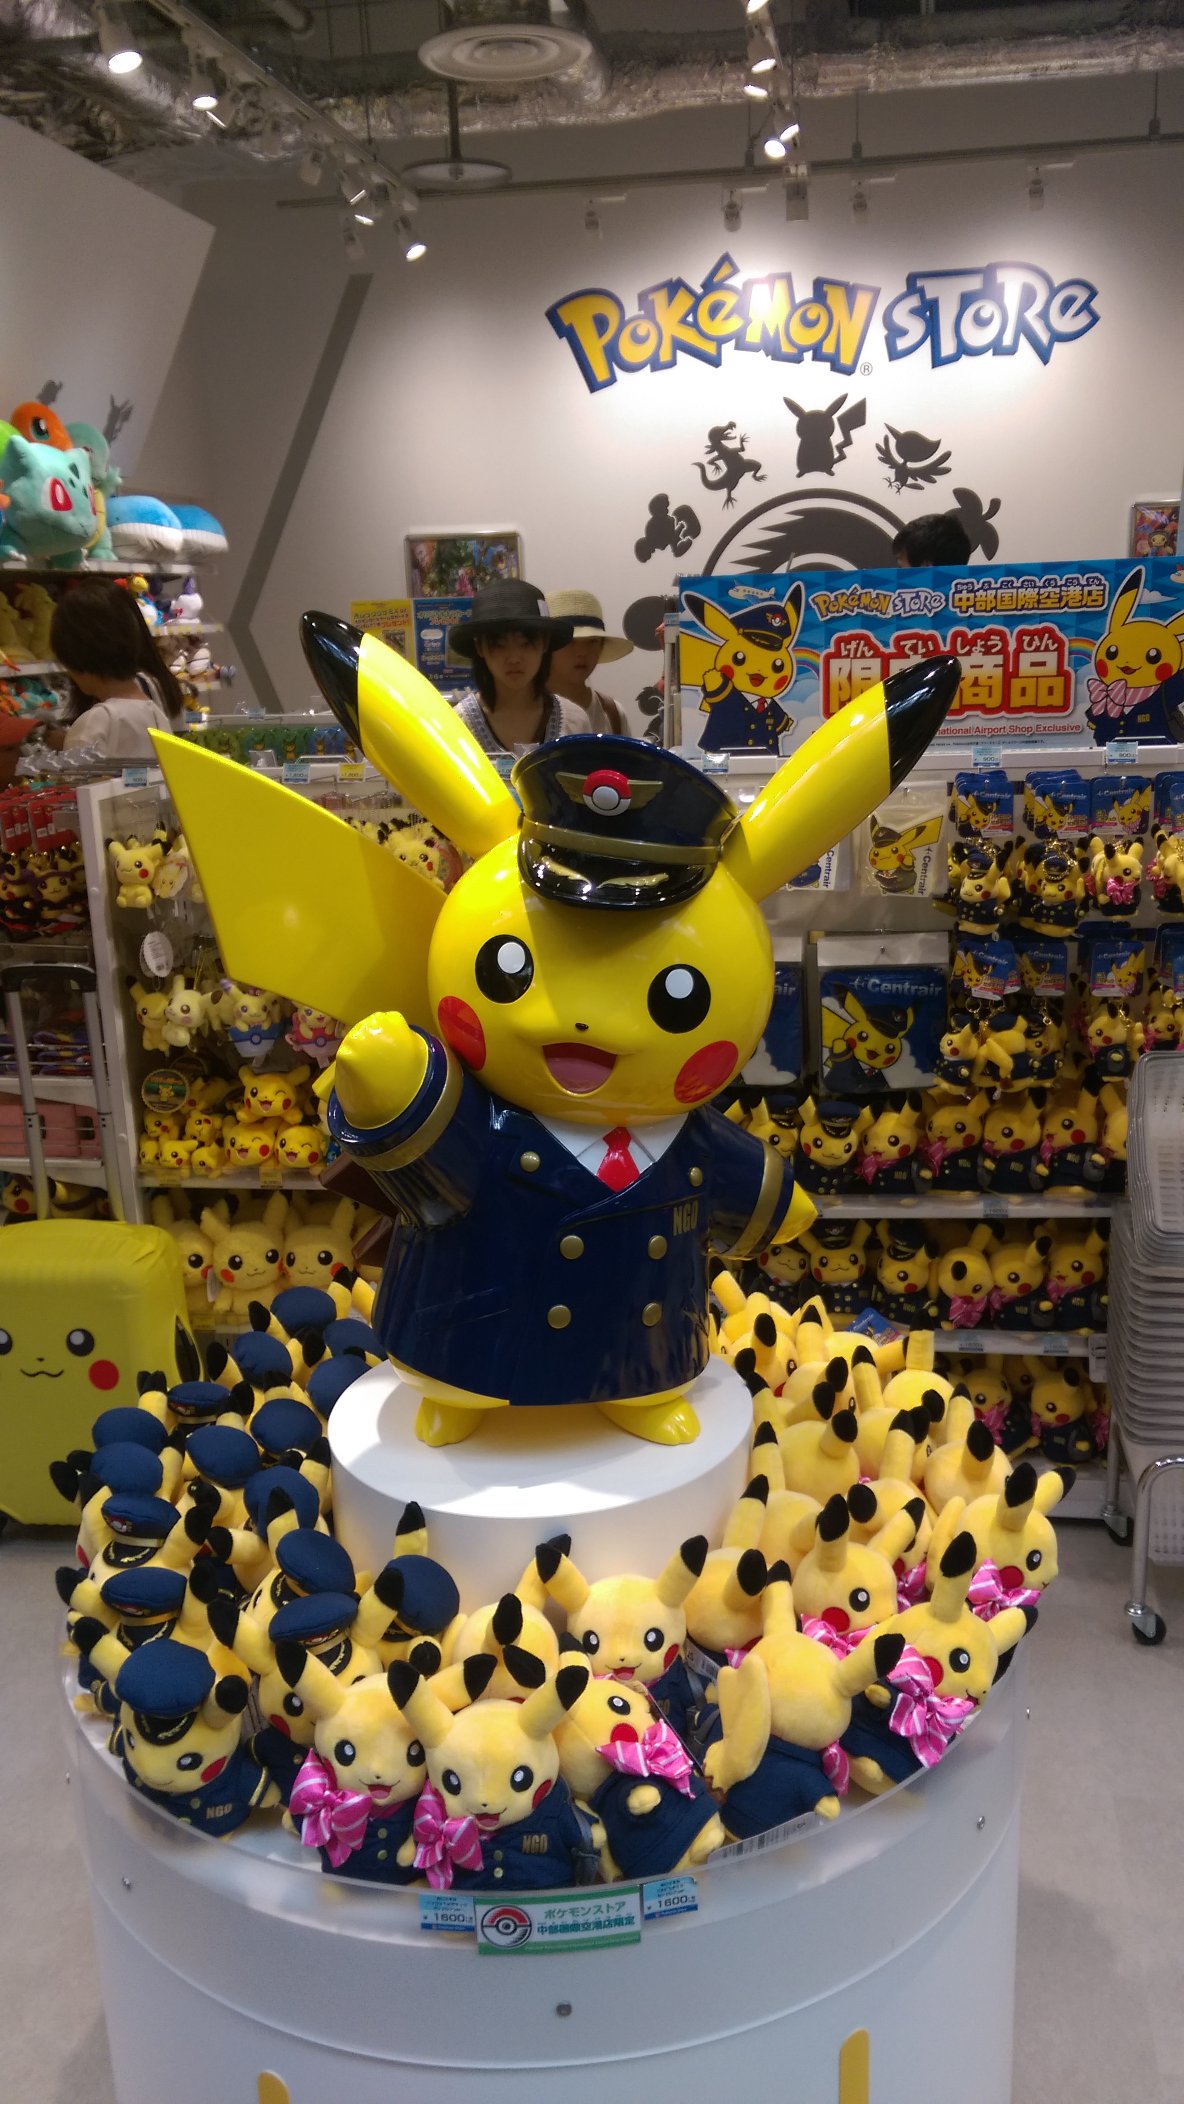 Lankyspirit Game Gaijin New Pokemon Centre Has Opened In Nagoya Airport Picked Up An Ngo Air Hostess Pikachu To Go With My Kix Pilot T Co Oc6g47bjmv Twitter